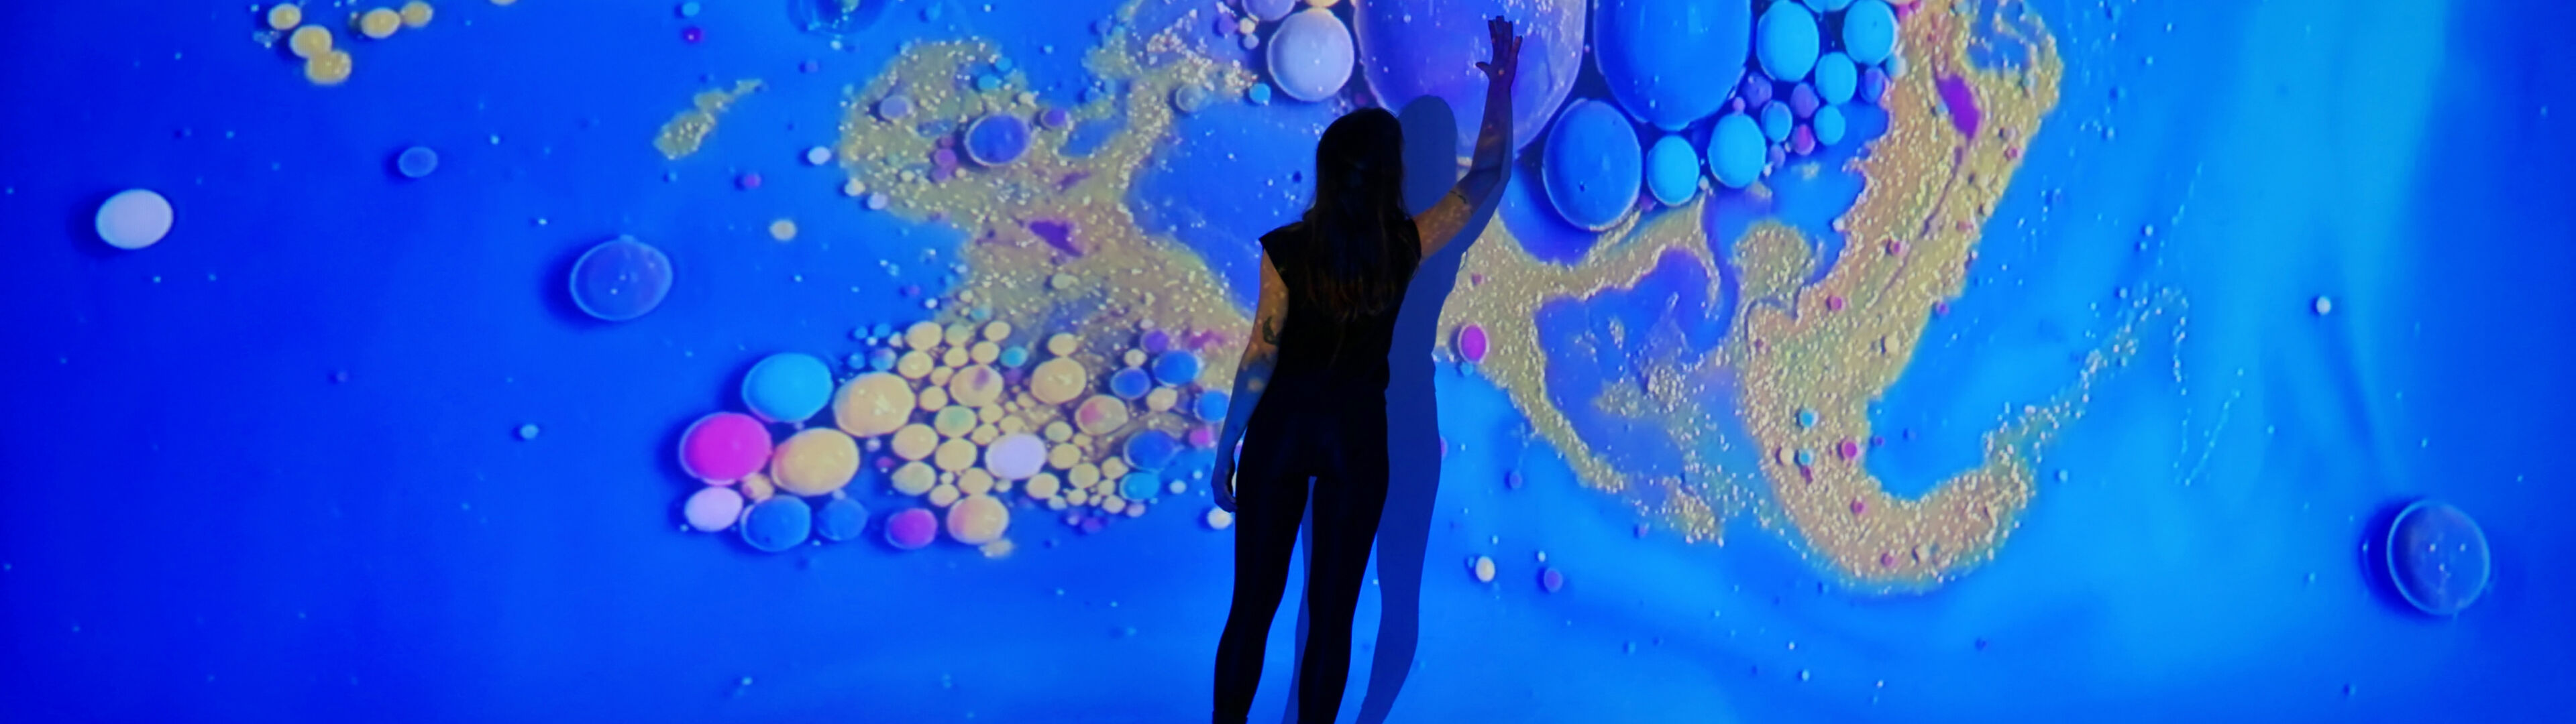 A person is silhouetted against a vibrant, interactive art display featuring dynamic, iridescent bubbles on a deep blue background.